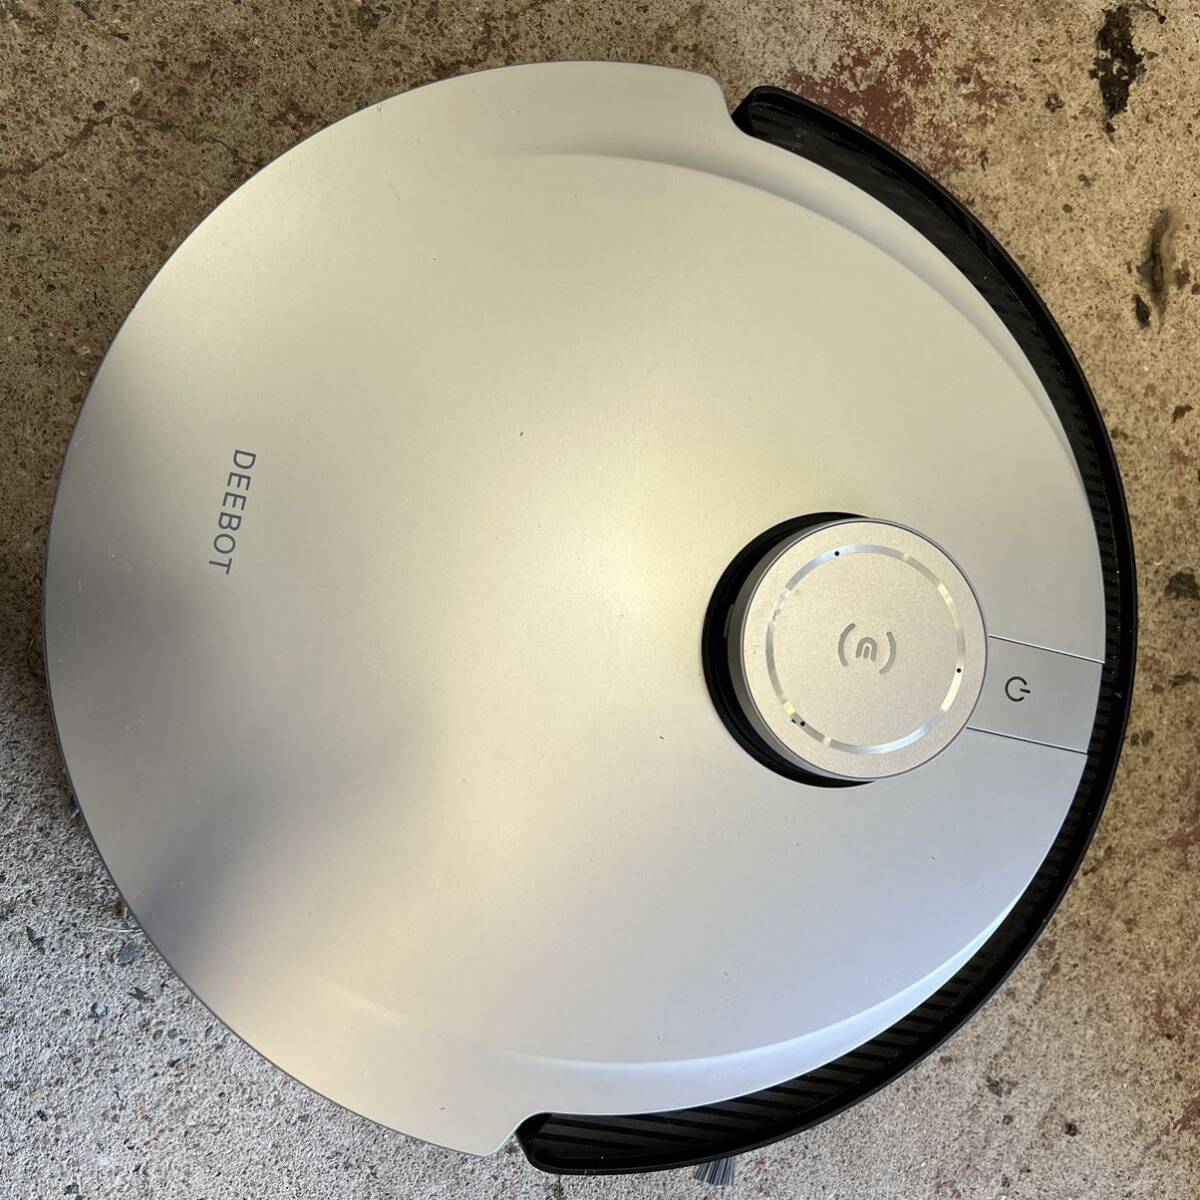  west 542 [ operation guarantee ] ECOVACS DEEBOT X1 OMNI DEX11 CH2103 full automation all-in-one robot vacuum cleaner eko back s used 